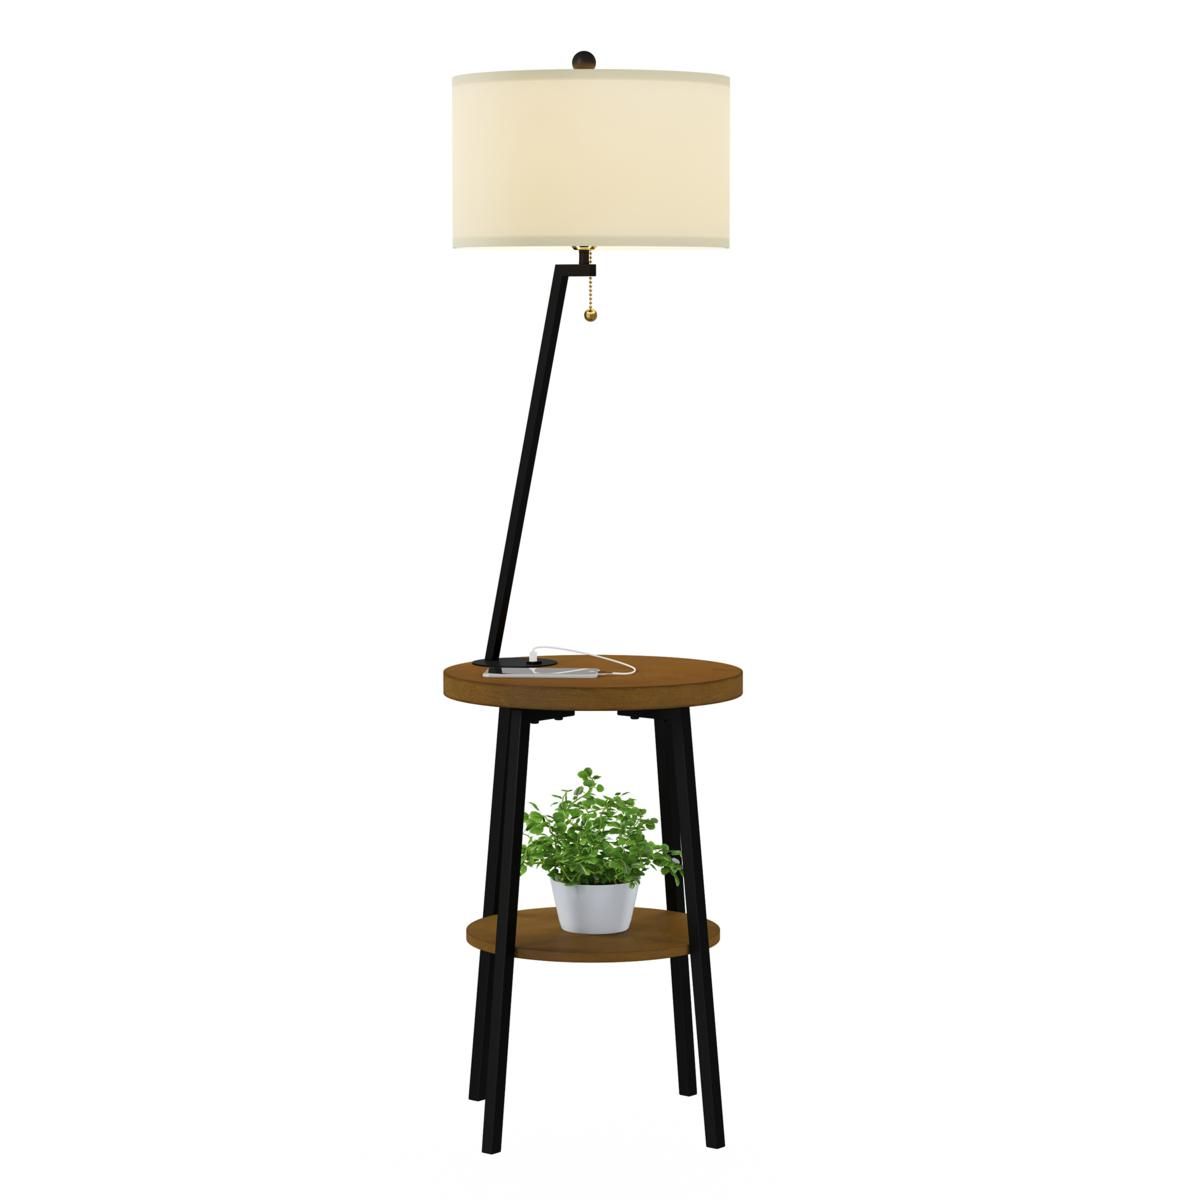 Hsn Throughout Floor Lamps With 2 Tier Table (View 11 of 15)